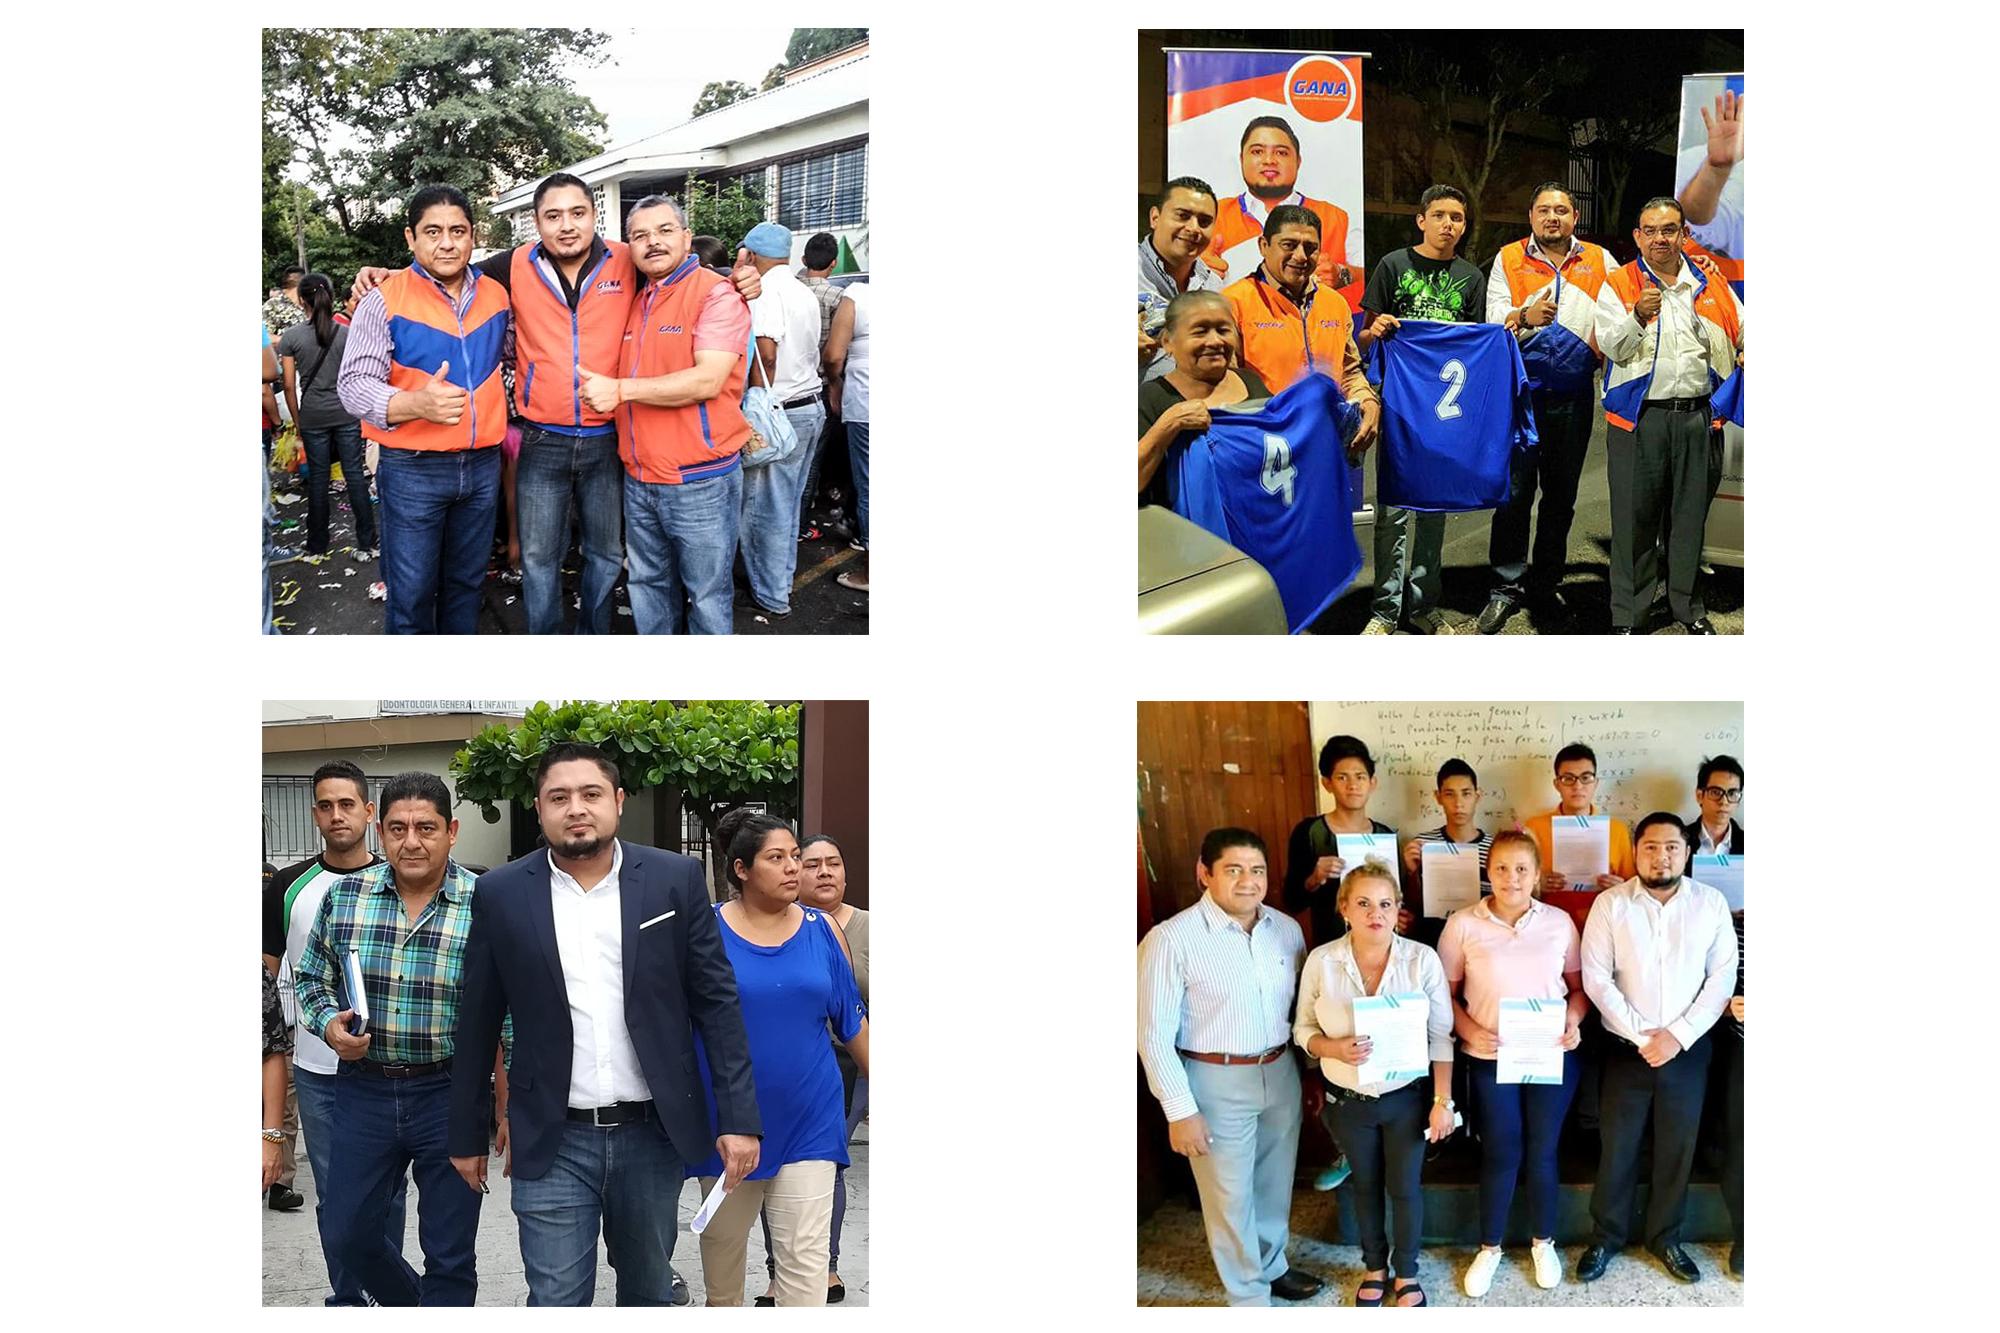 Top-left: Hernández Molina, (left) with Luna (center) and Nelson Guardado (right), president of GANA, at a party event in 2014. Top-right: Hernández Molina in an orange jacket at a 2017 campaign event for Luna. Bottom-left: Hernández Molina, left, accompanies then-legislator Luna to visit the San Salvador Archdiocese. Bottom-right: Luna and Hernández Molina give scholarships to students during Luna